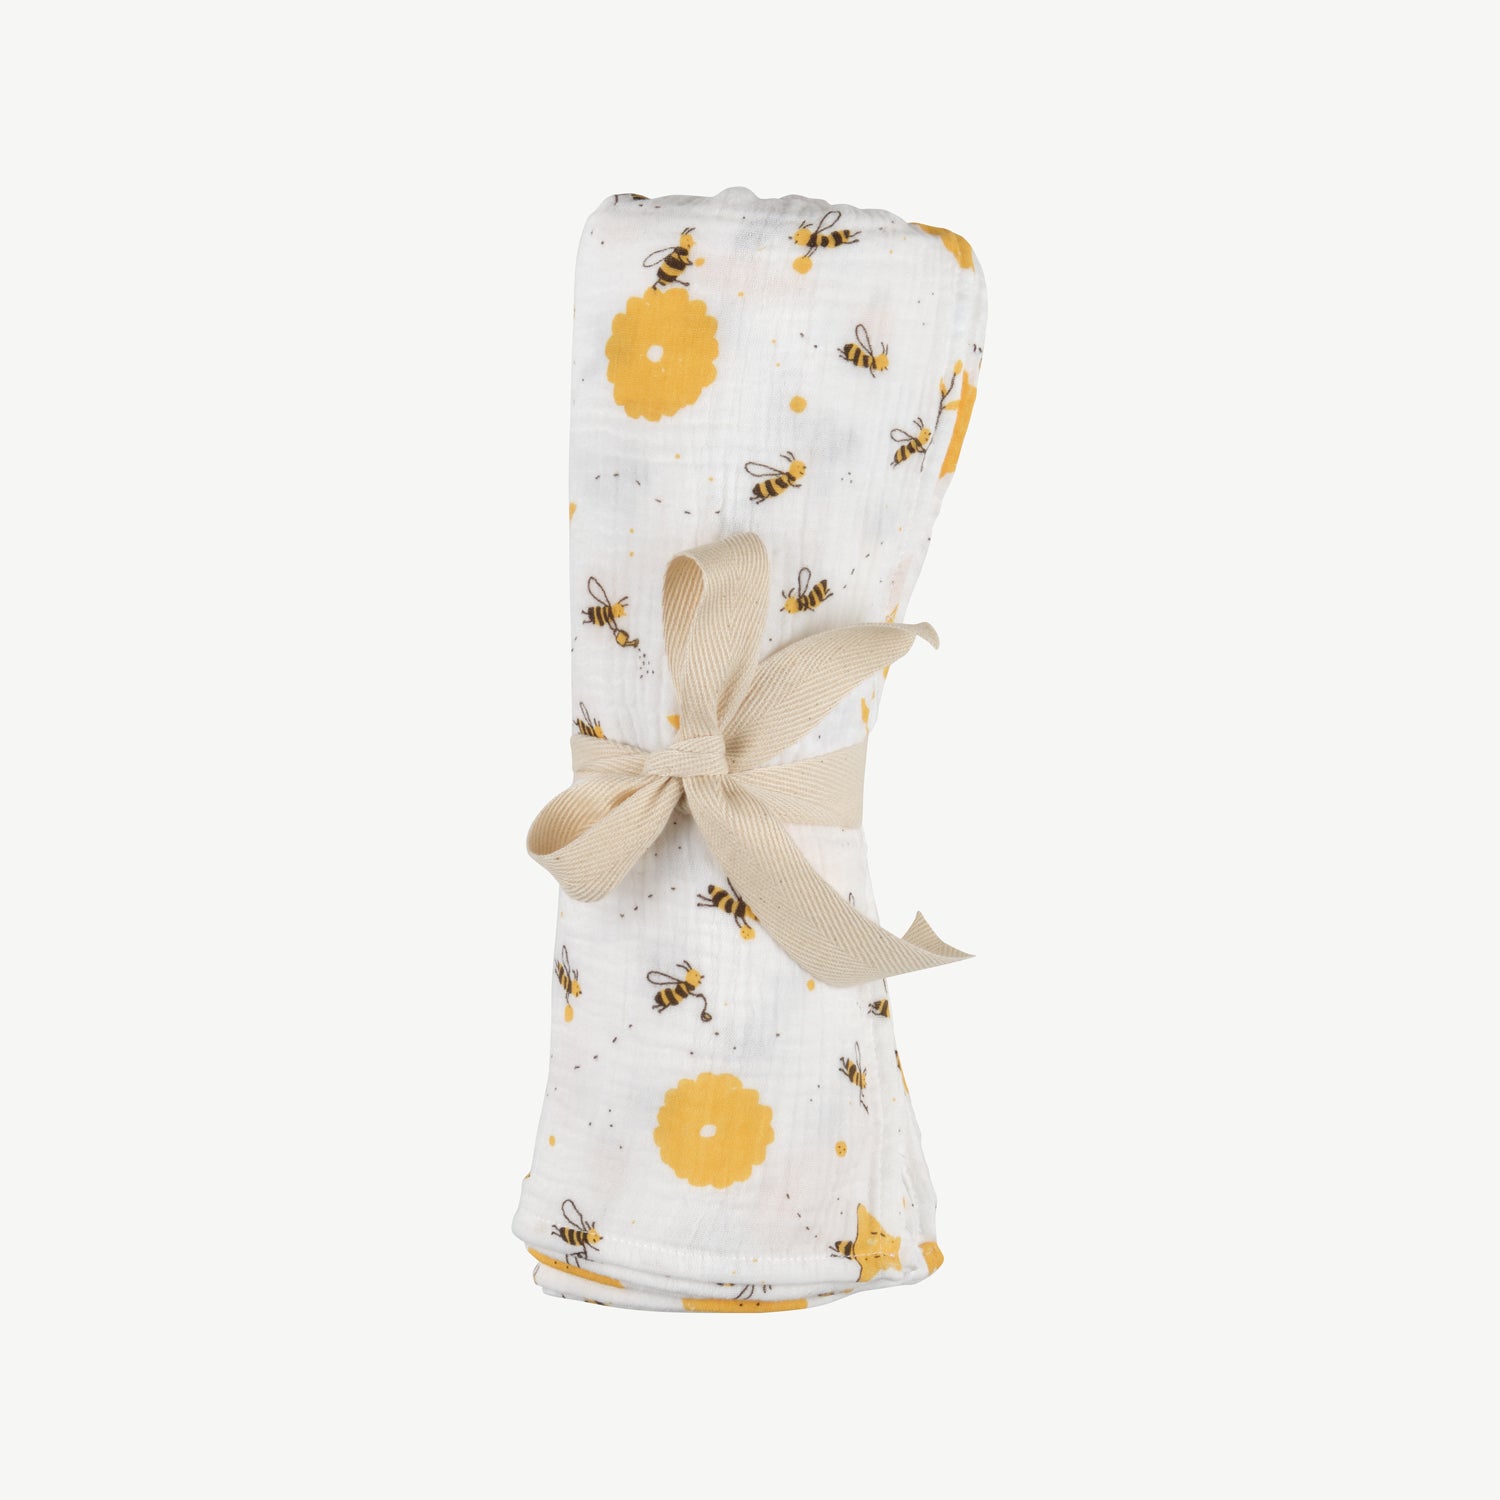 'buzzy bees' ivory muslin swaddle